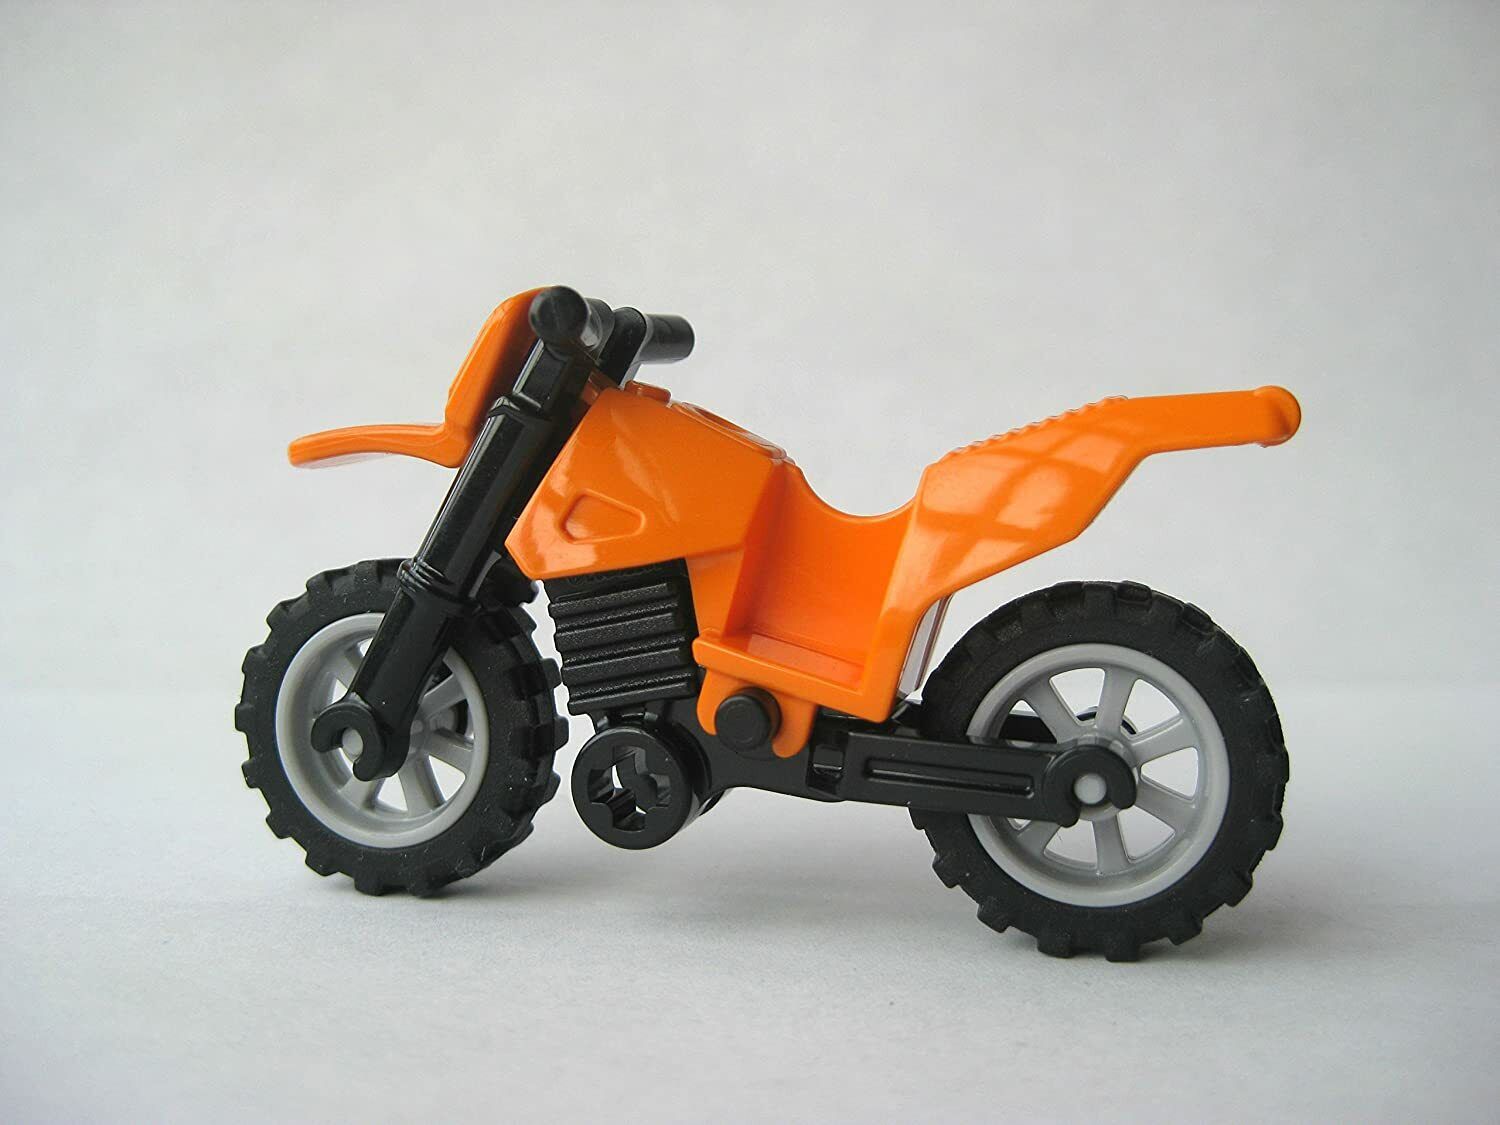 Lego ORANGE DIRT BIKE Motorcycle for Minifigures to Ride 